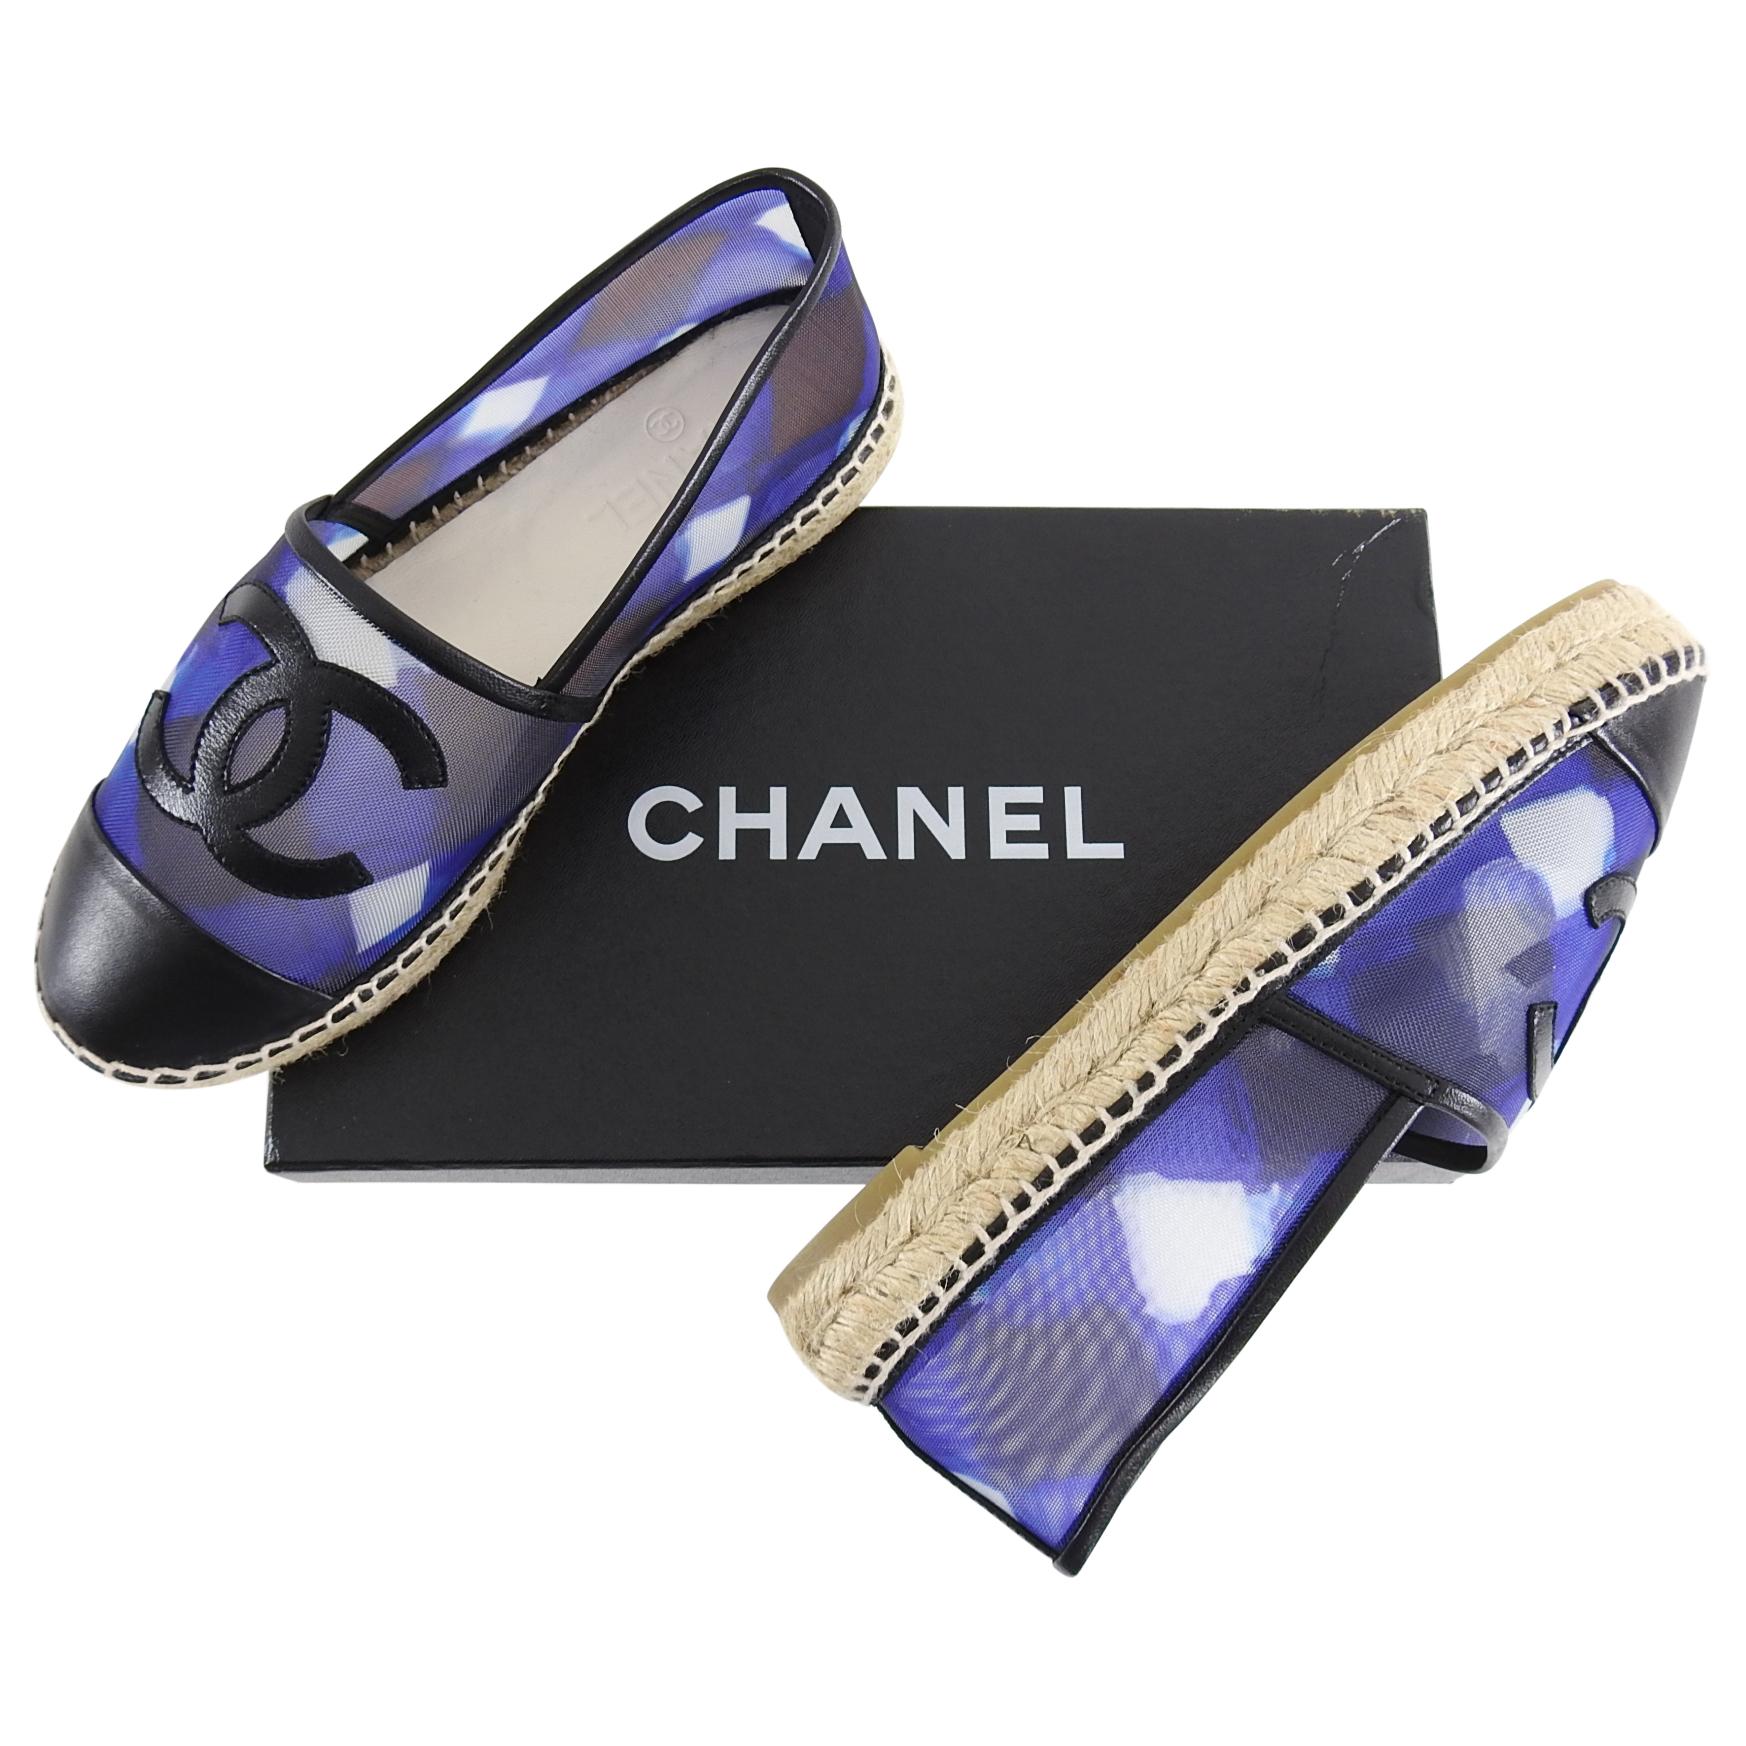 Chanel Blue Mesh and Black Leather CC Espadrille Flats.  From the 2016 collection, these sheer mesh espadrilles are trimmed with black leather.  Marked size 37 (USA 6.5 but these run small and are best for a 36.5 or USA 6). Brand new in box with